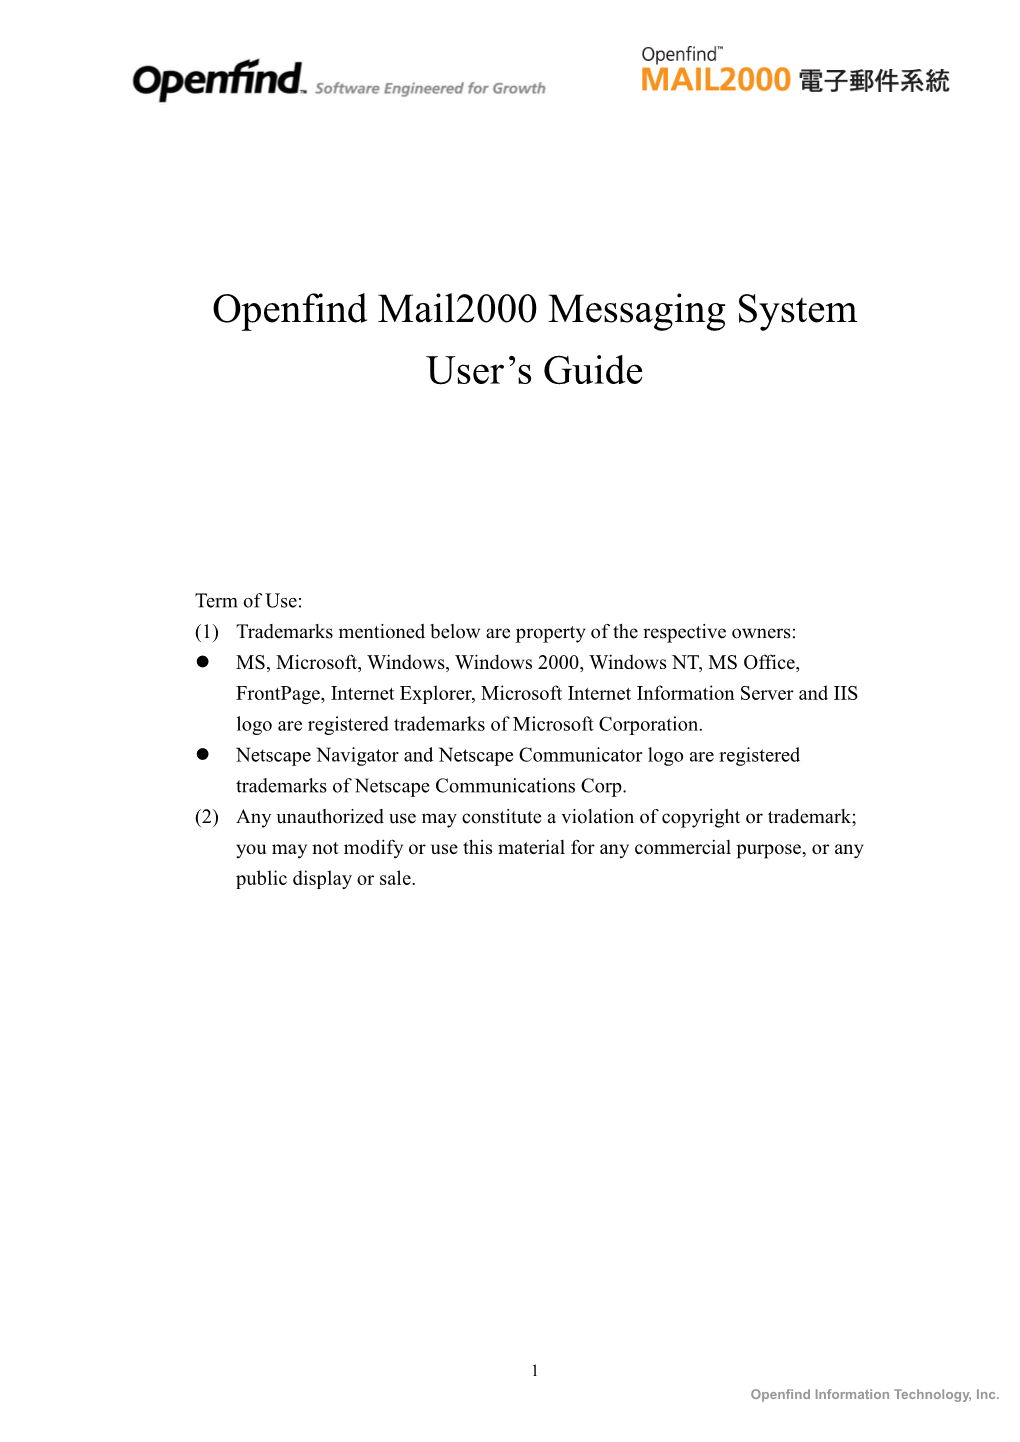 Openfind Mail2000 Messaging System User's Guide